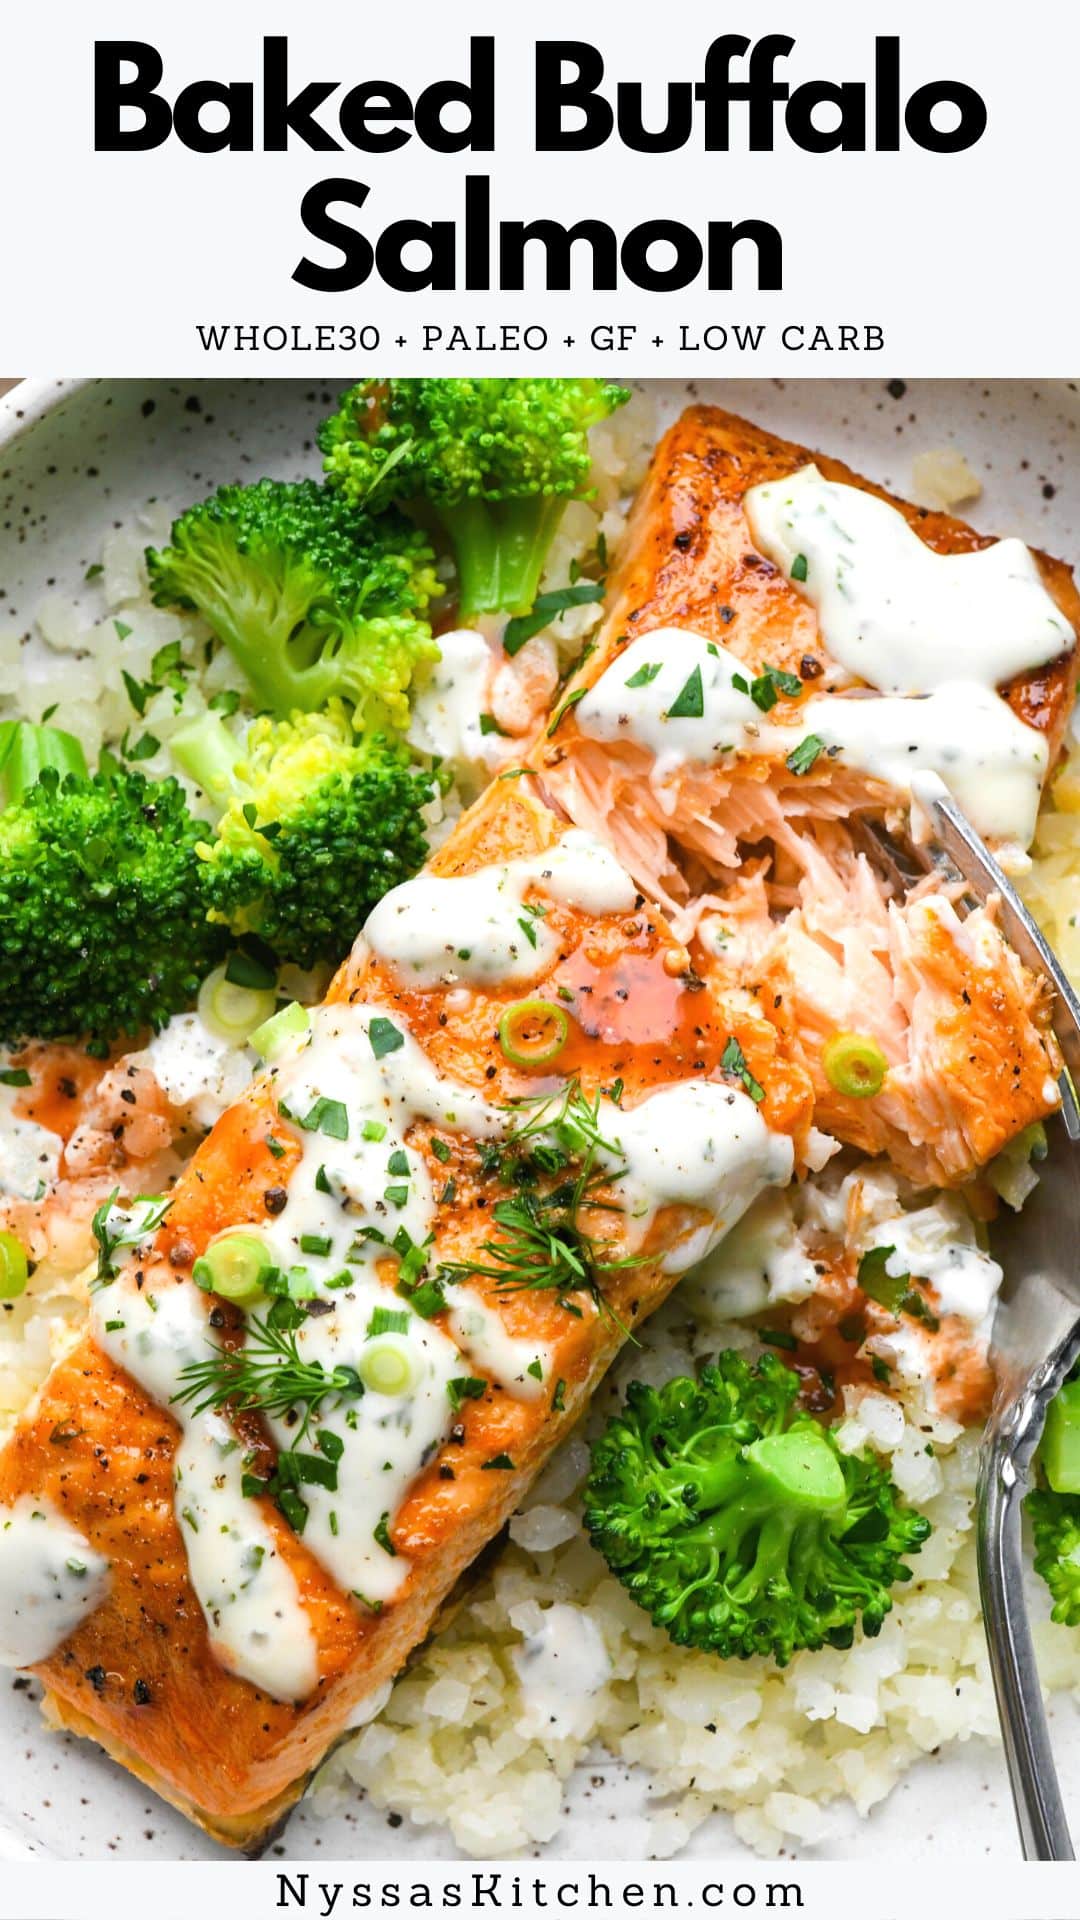 This baked buffalo salmon is a delightfully flavorful and healthy protein that's easy enough to make any night of the week! It's marinated quickly in a simple make-at-home buffalo sauce and baked in the oven until perfectly cooked - flaky and moist! Paleo, Whole30, GF, keto friendly, low carb, and dairy free.